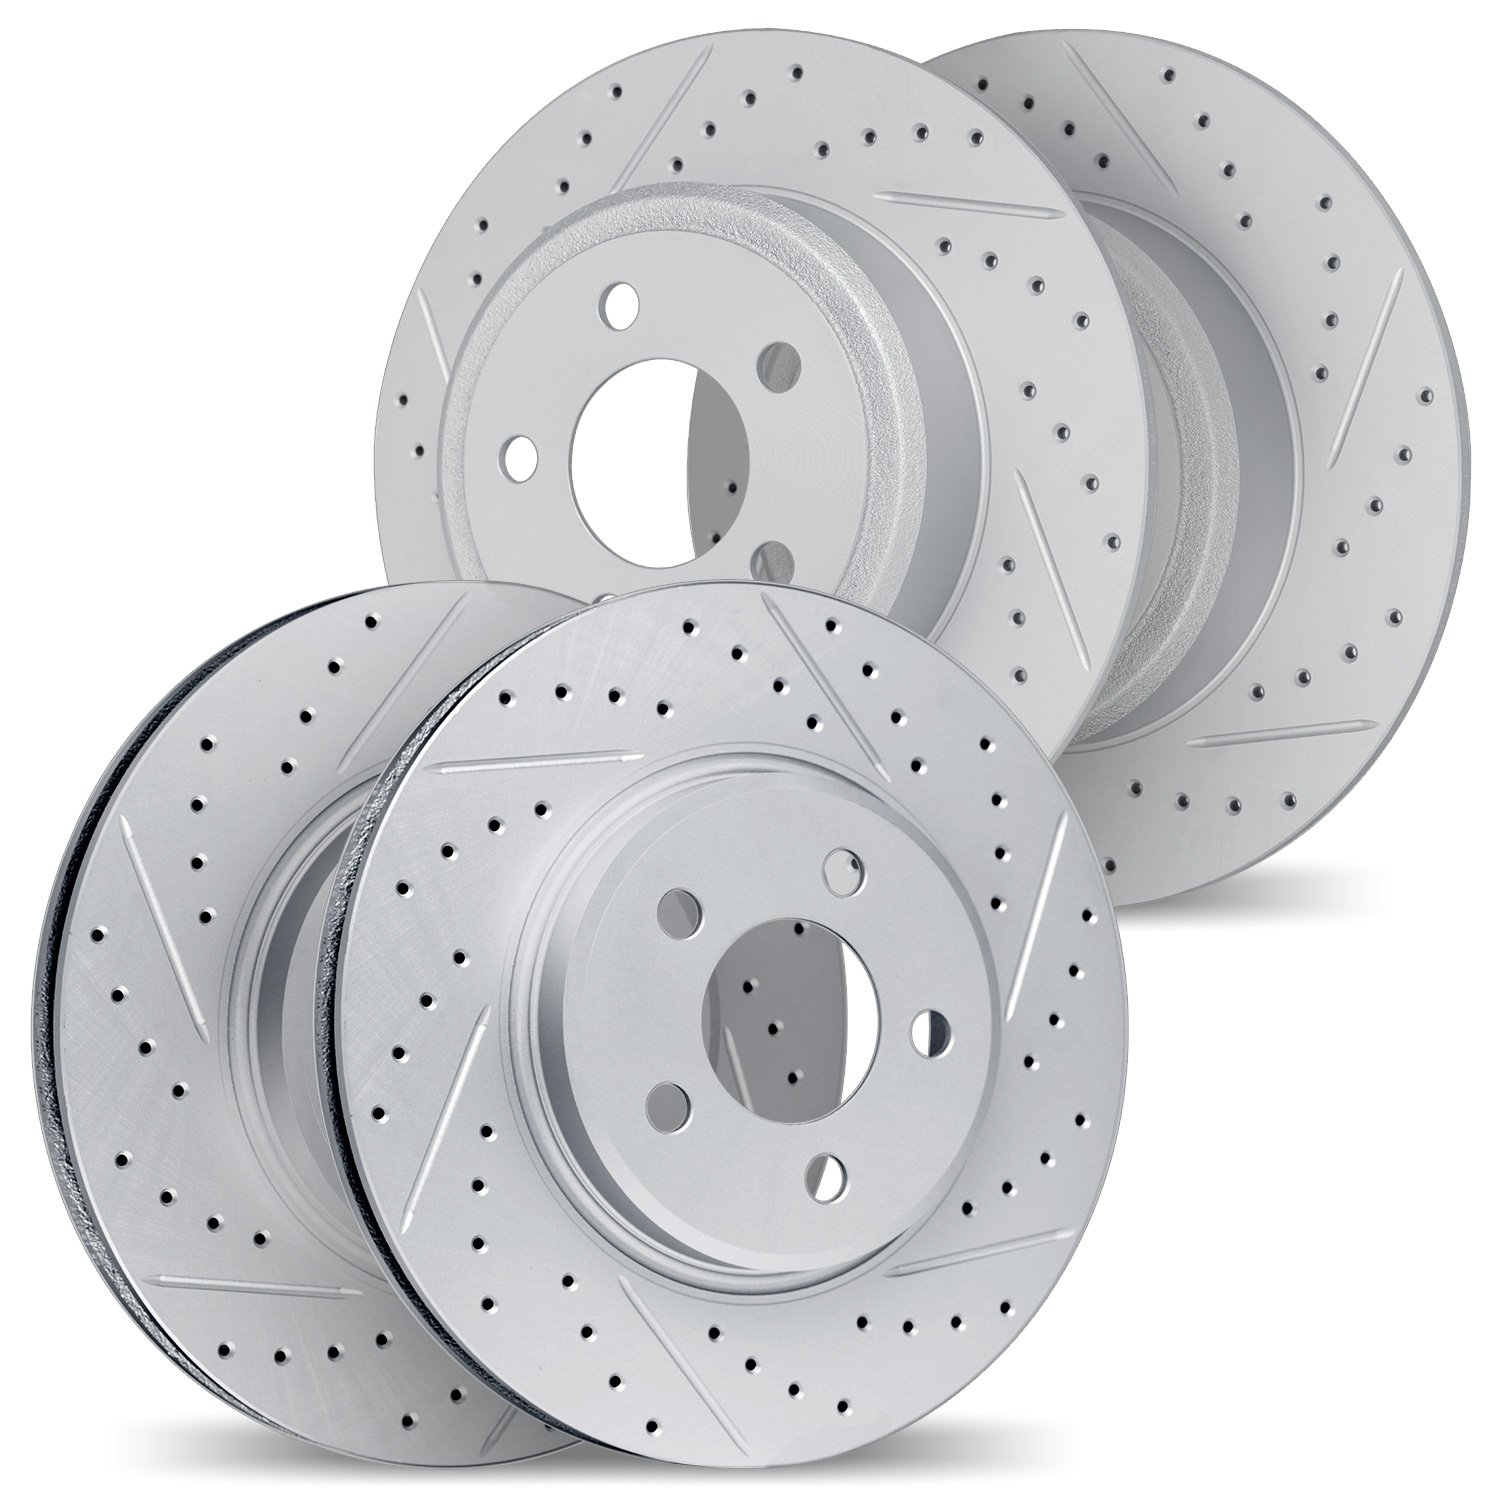 2004-76025 Geoperformance Drilled/Slotted Brake Rotors, 2011-2016 Lexus/Toyota/Scion, Position: Front and Rear